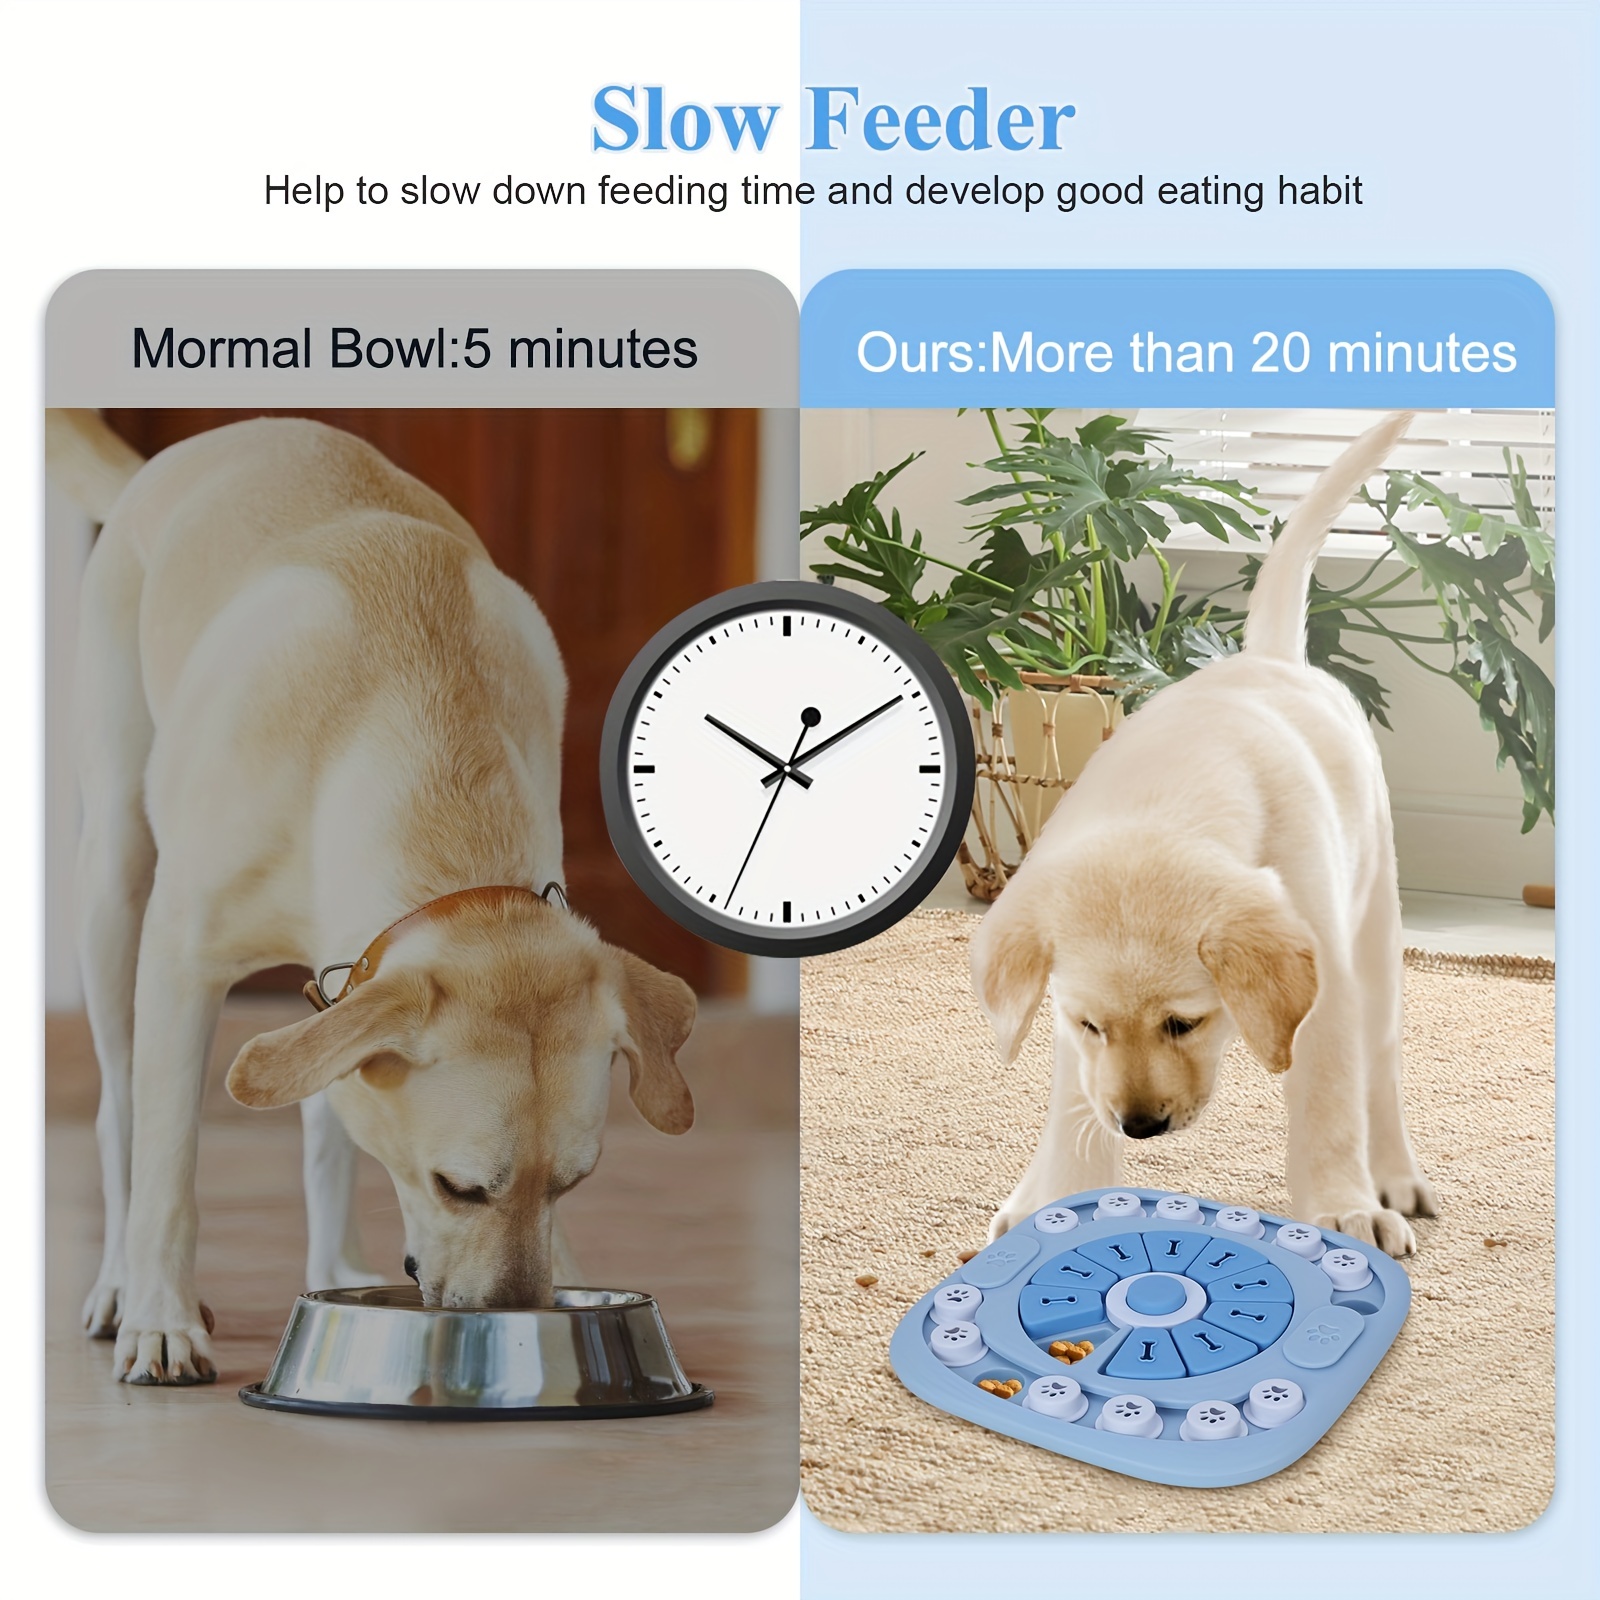 Dog Puzzle Toys, Slow Feeder Dog Bowls for Small/Medium/Large Dogs, Treat  Dispensing Interactive Dog Toys for Boredom and Stimulating Interactive Dog